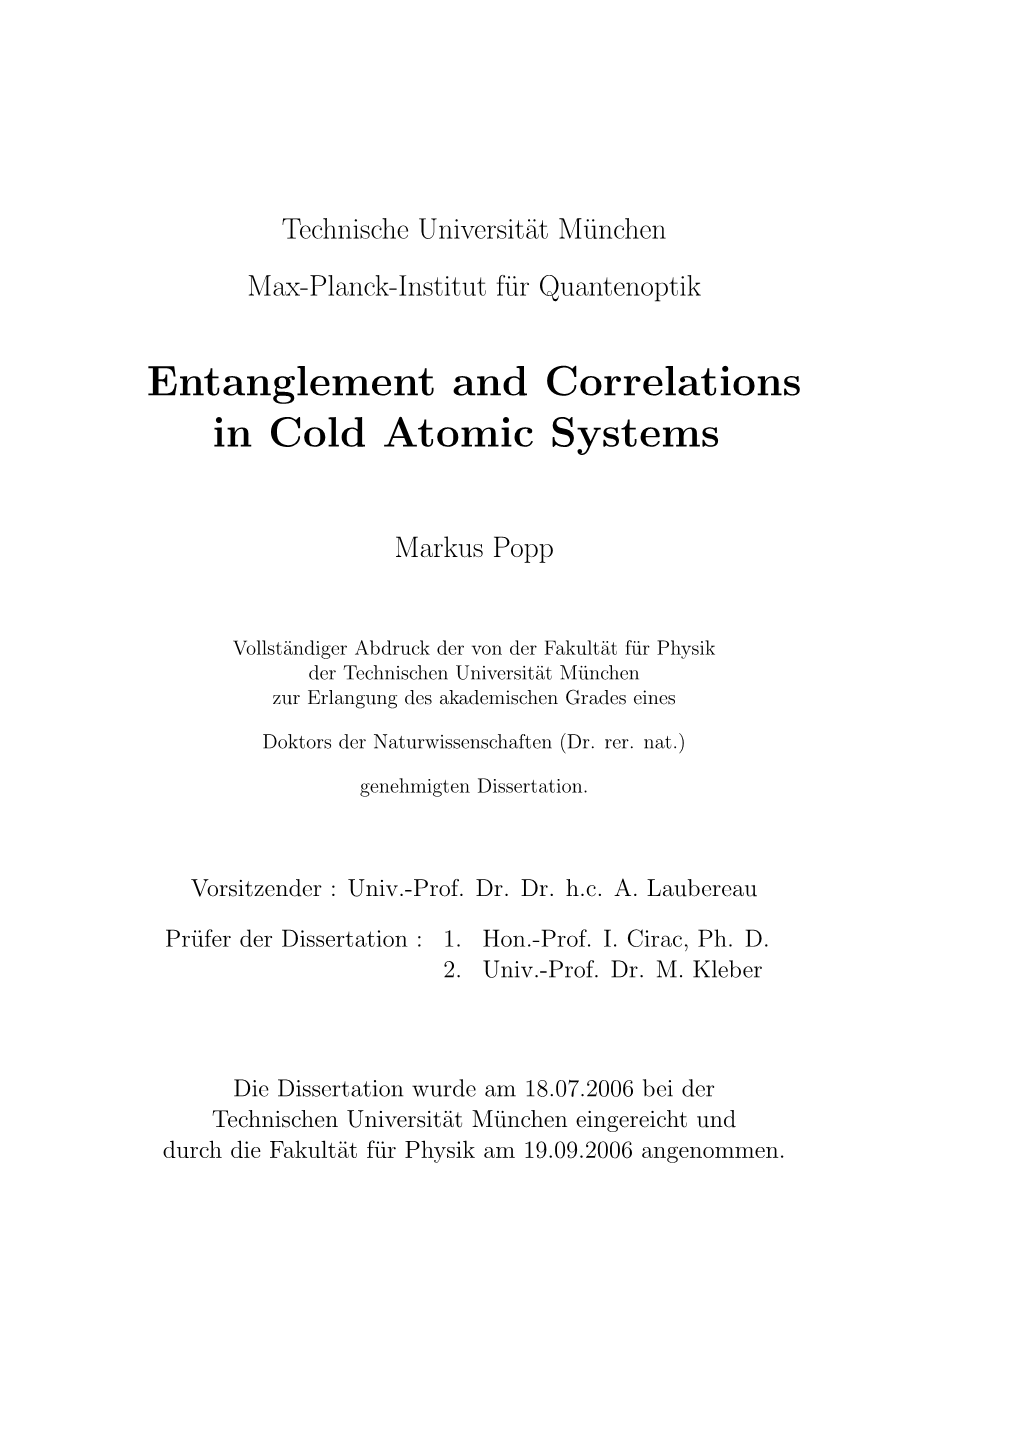 Entanglement and Correlations in Cold Atomic Systems